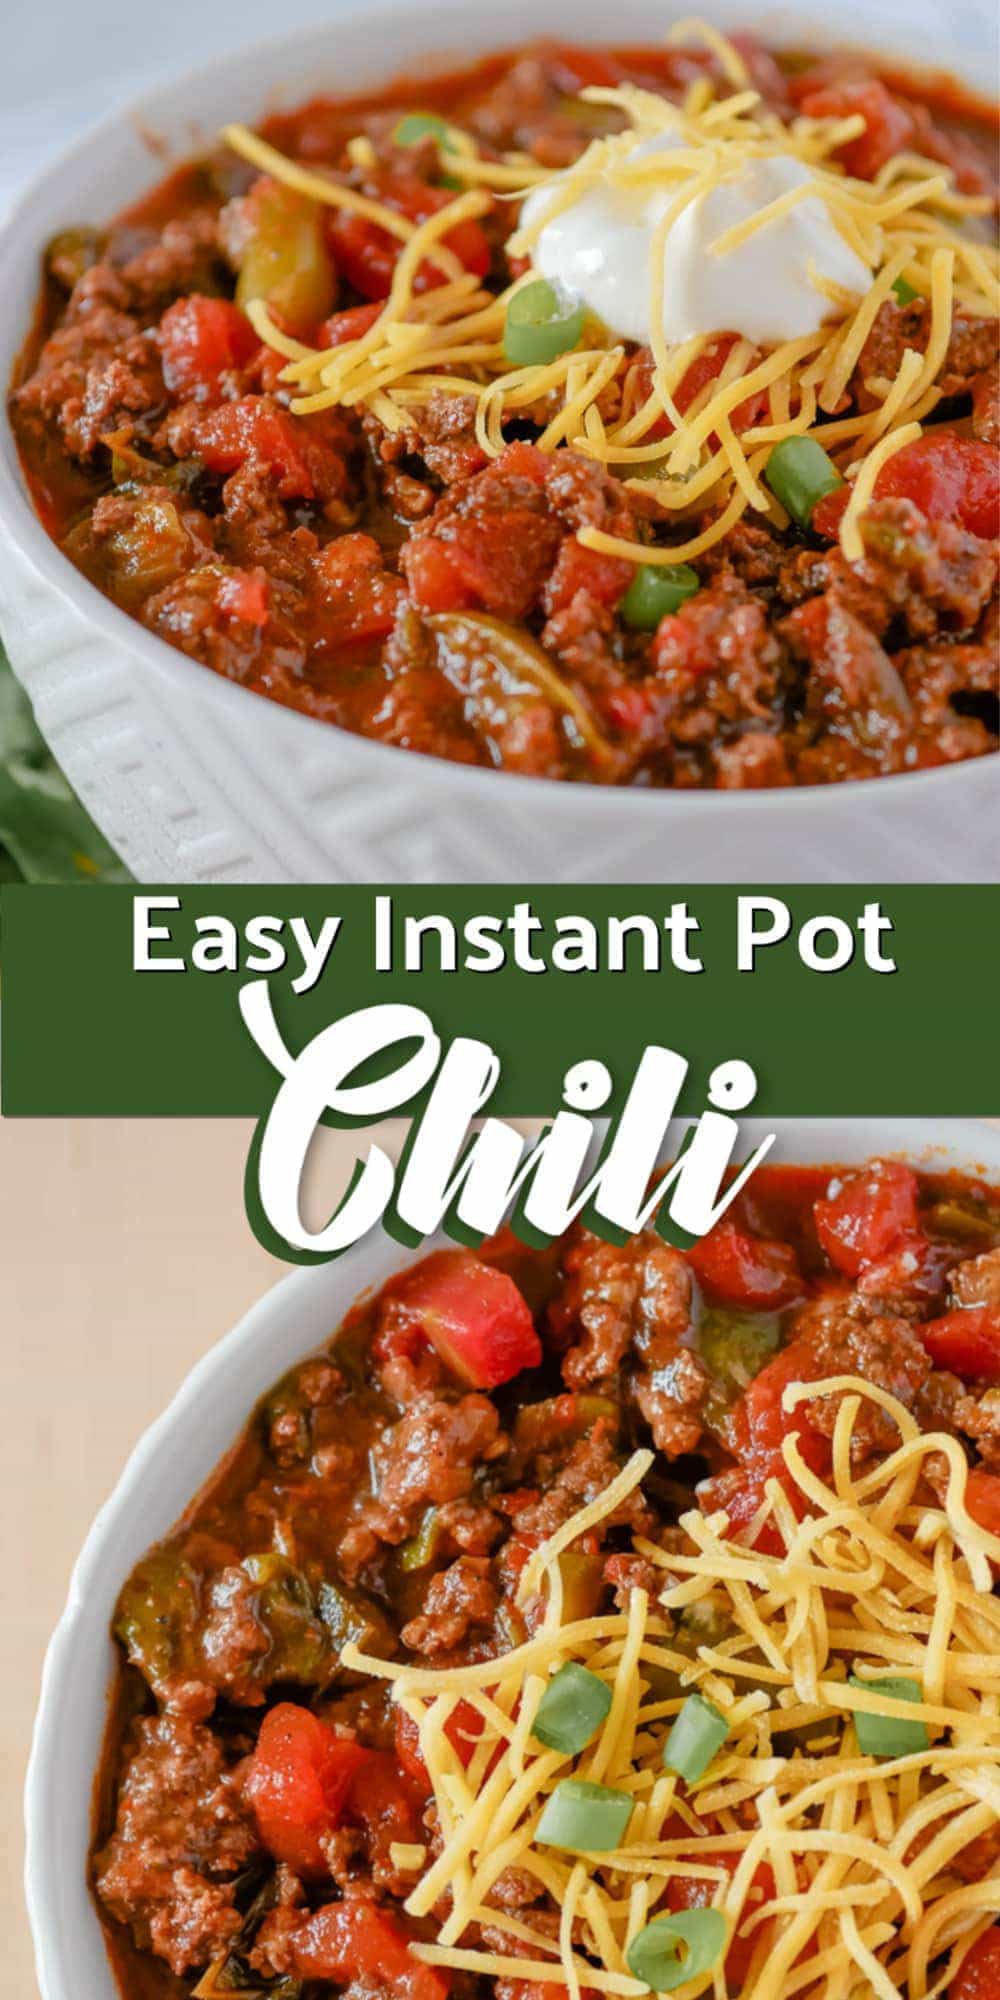 This rich and hearty Instant Pot chili recipe is perfect for cold winter days or anytime you are craving classic comfort food. Cincinnati style chili cooks easily in the pressure cooker for a one pot dinner that will be ready to enjoy in about 45 minutes. #chili #instantpot #easydinner #cincinnatichili